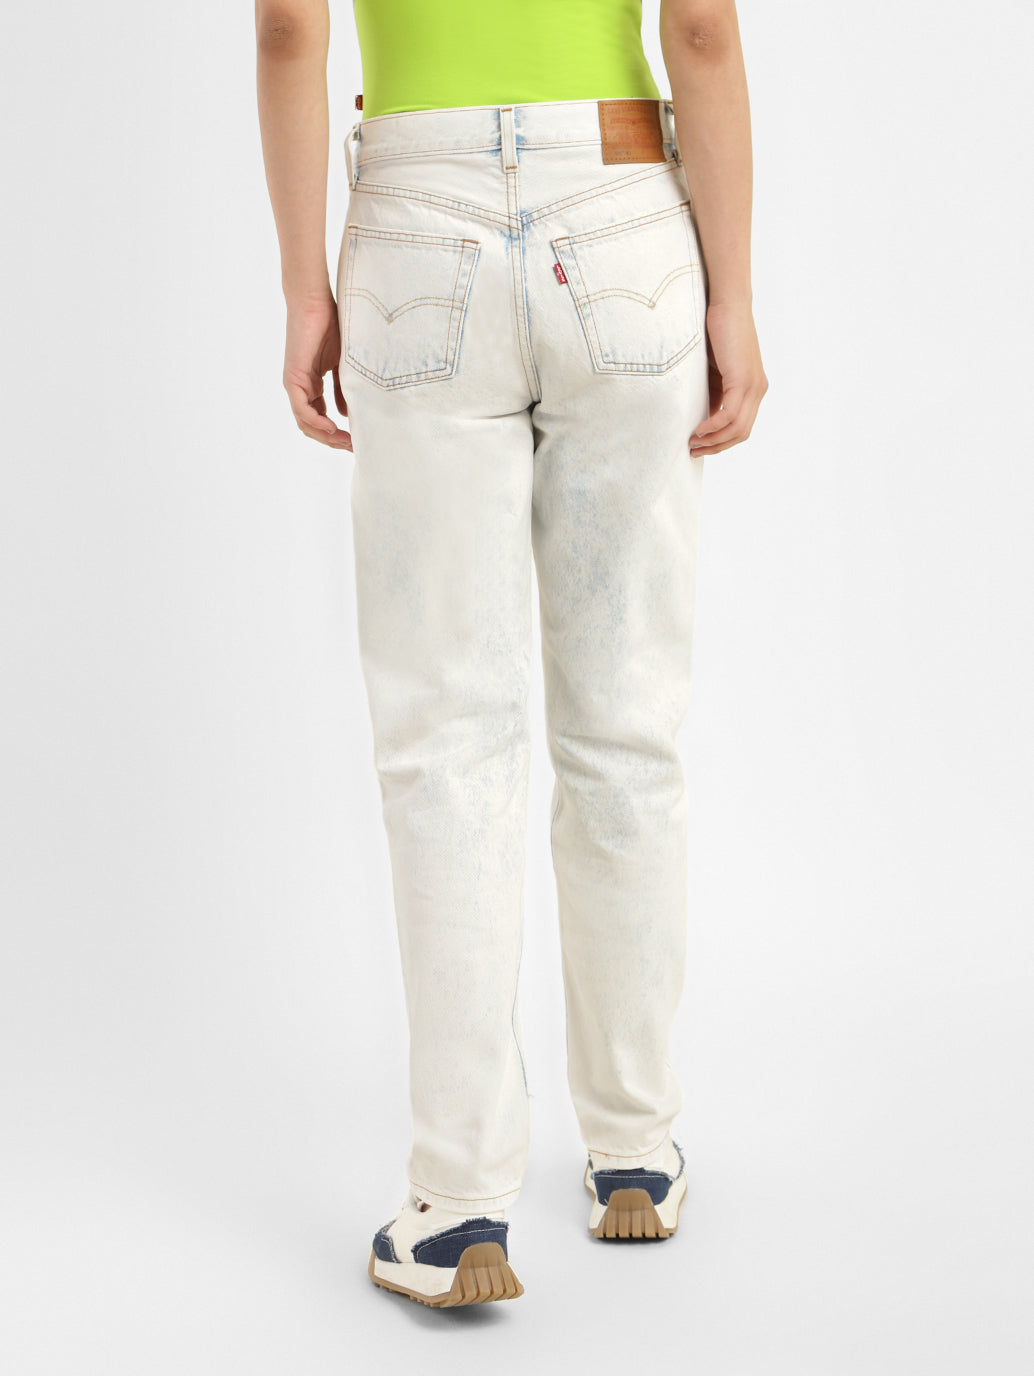 Women's 501 Straight Fit Jeans